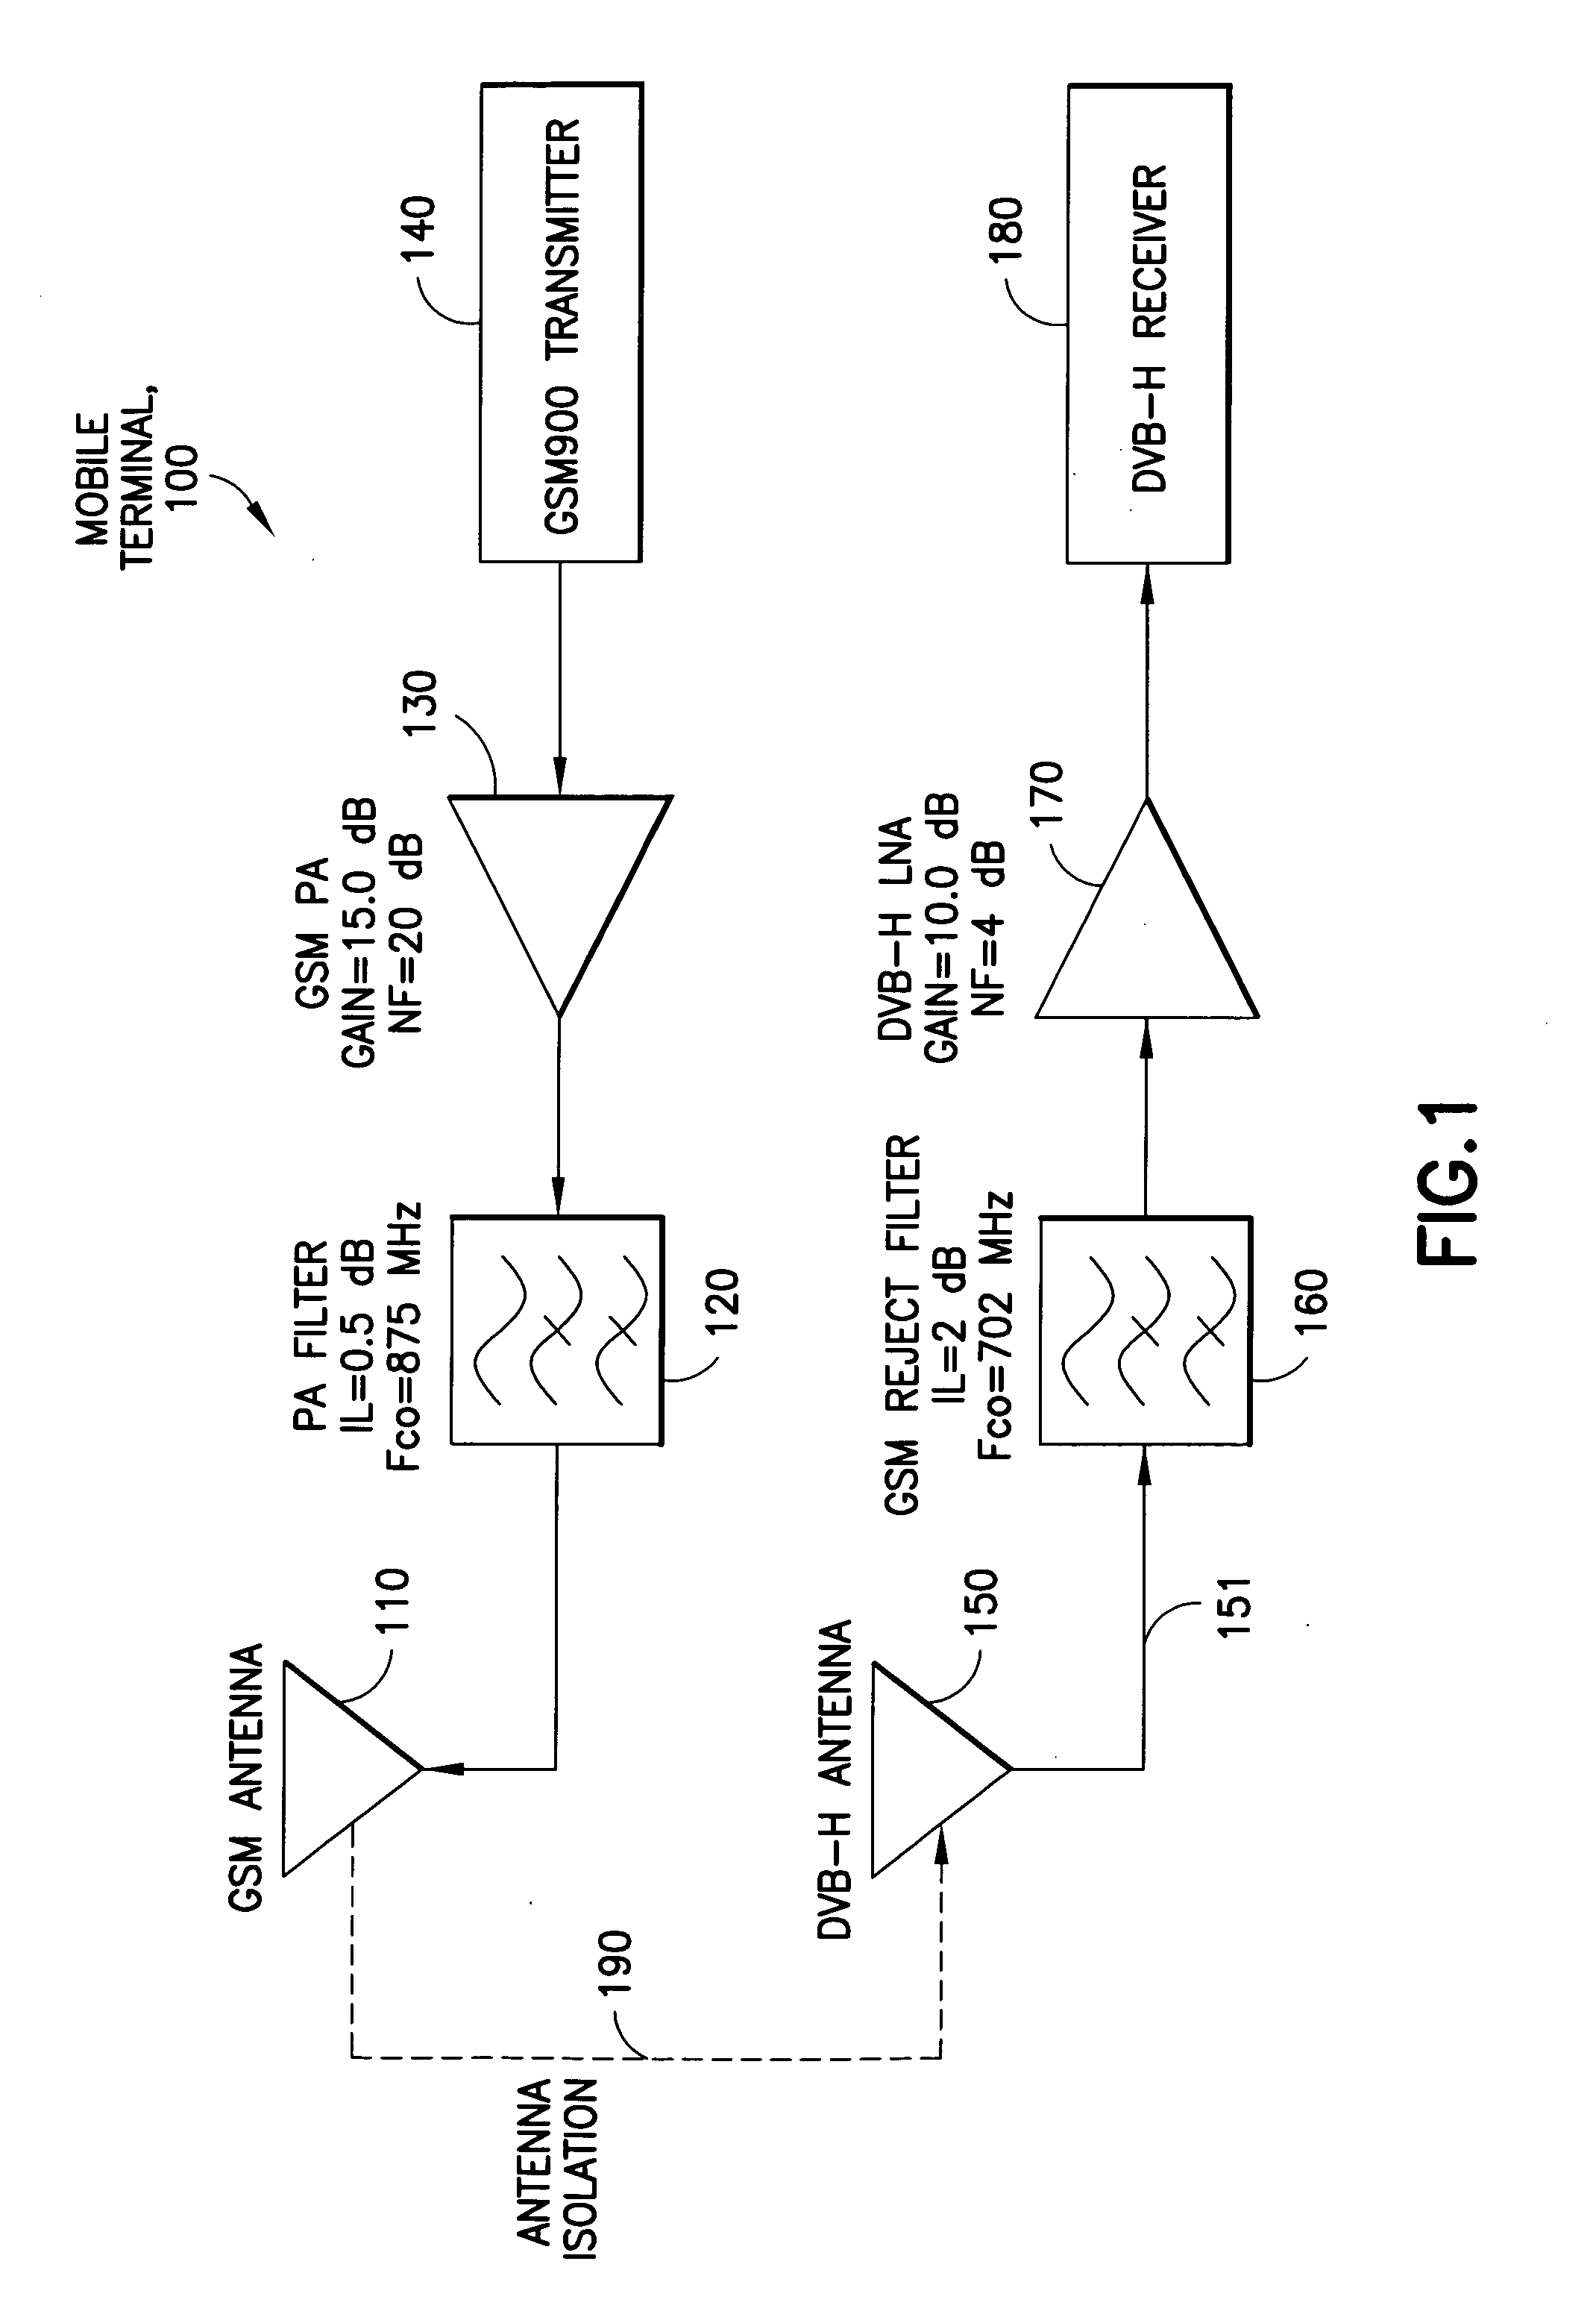 Interoperability improvement in terminals having a transmitter interfering with a receiver